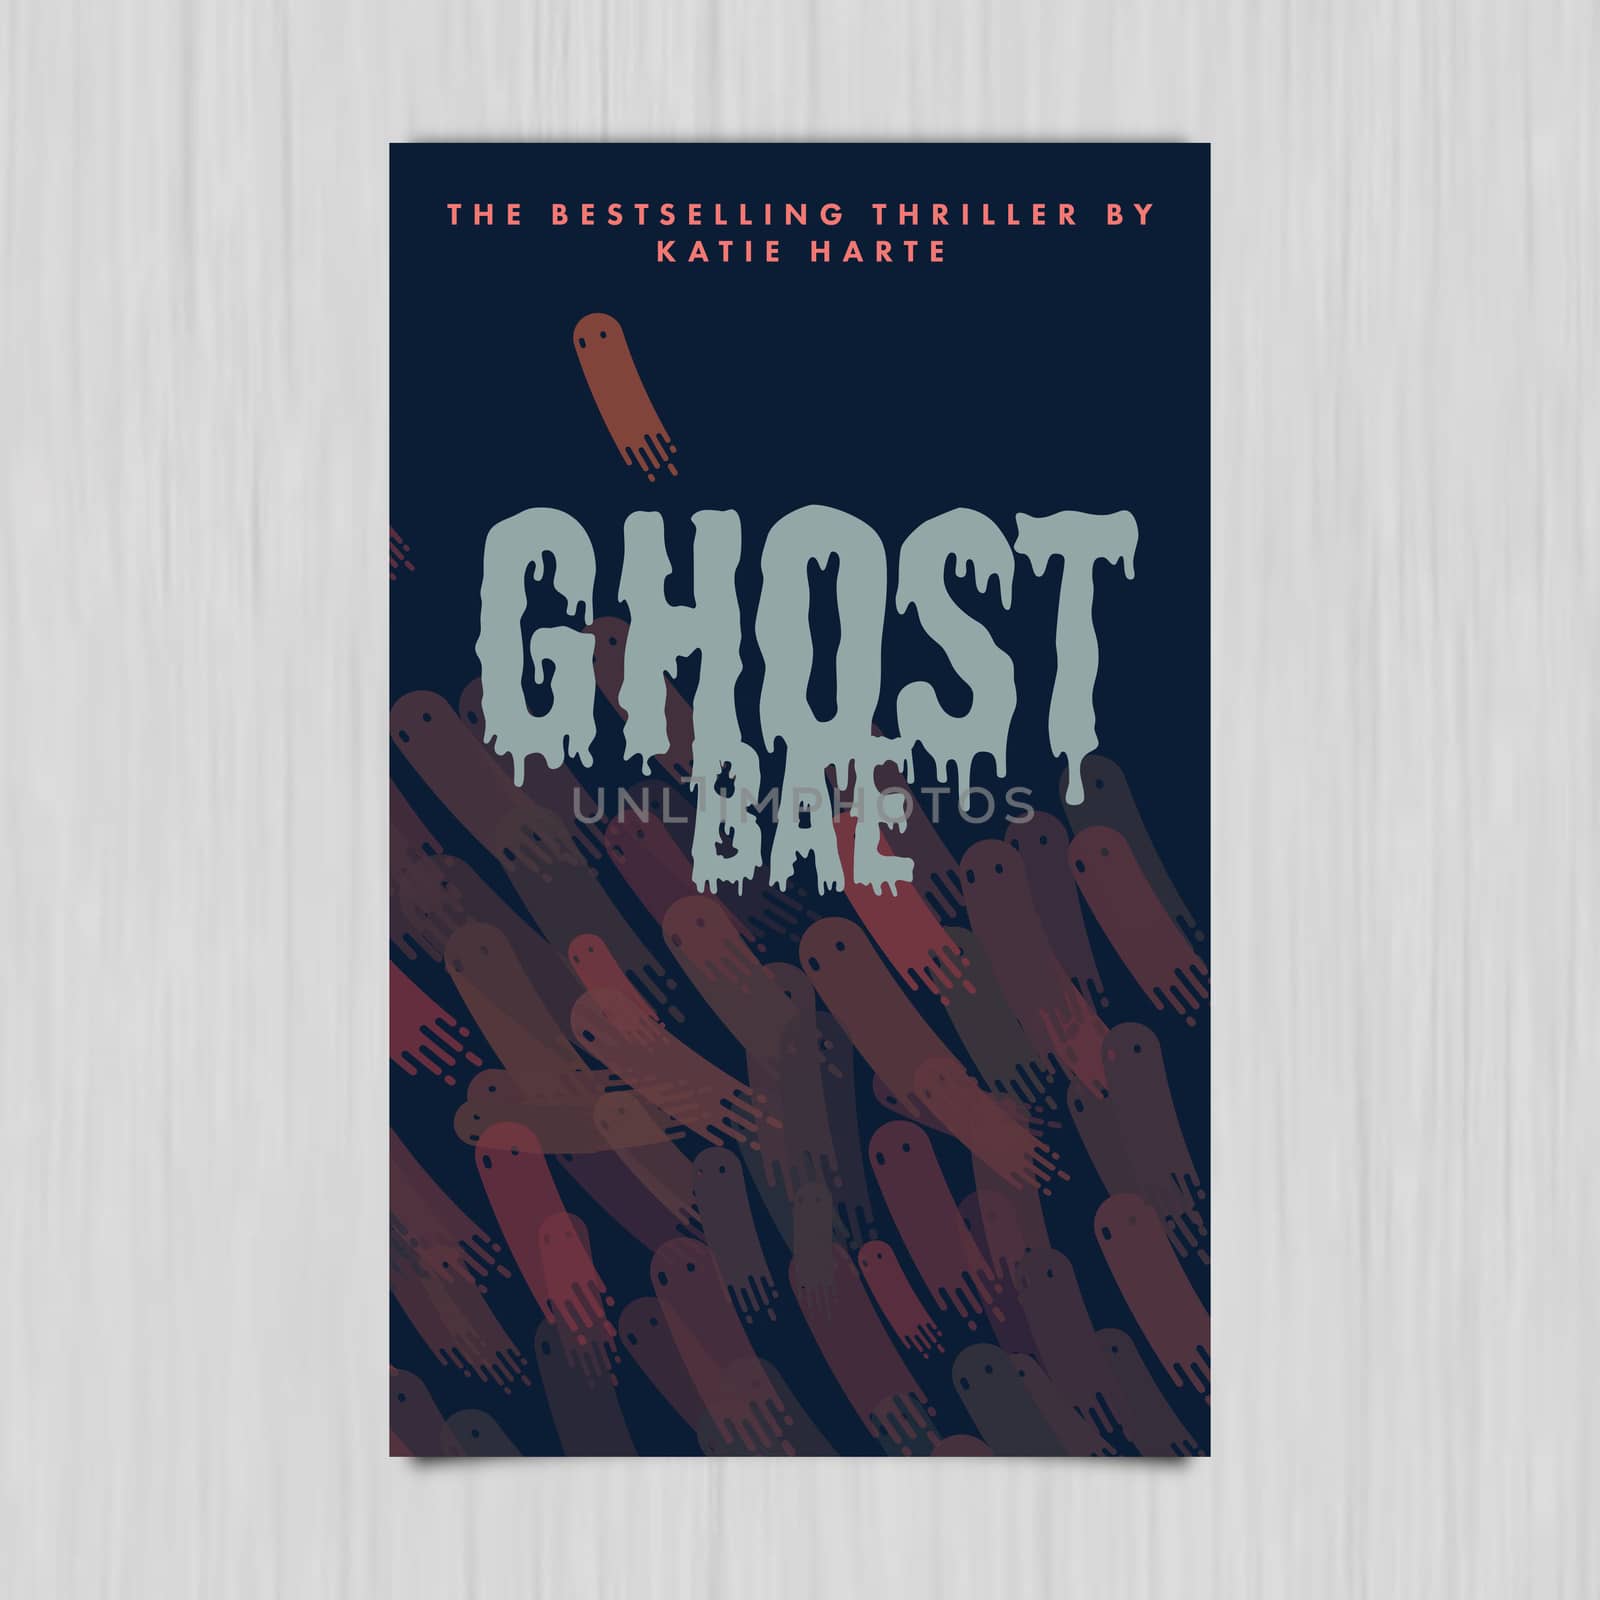 Vector of novel cover with ghost bae text against grey background